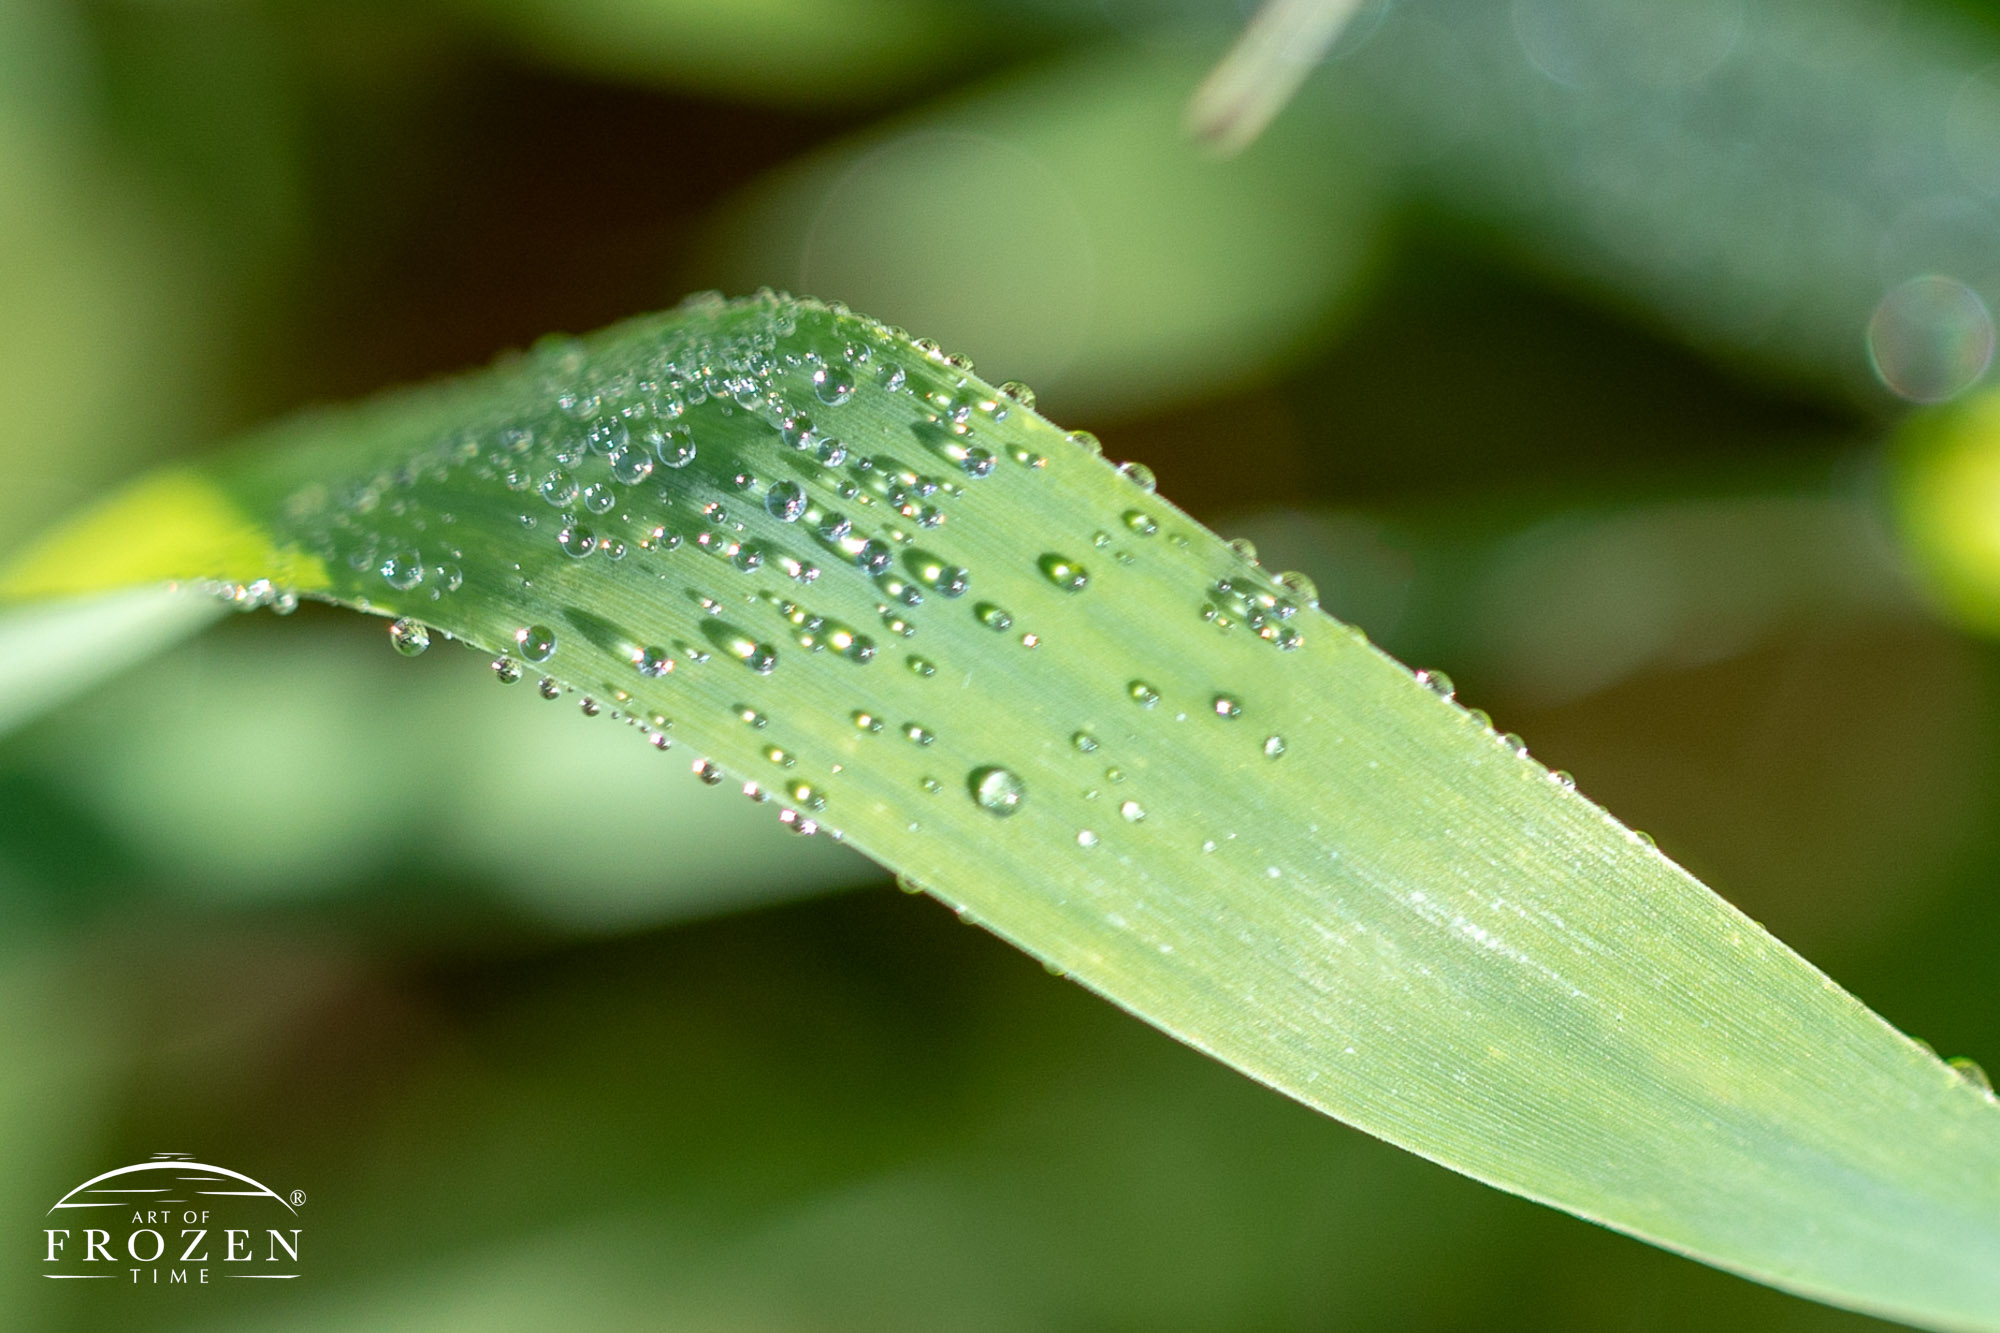 A close up image of morning dew on a wide plant leaf where the individual drops sparkle in the sun light